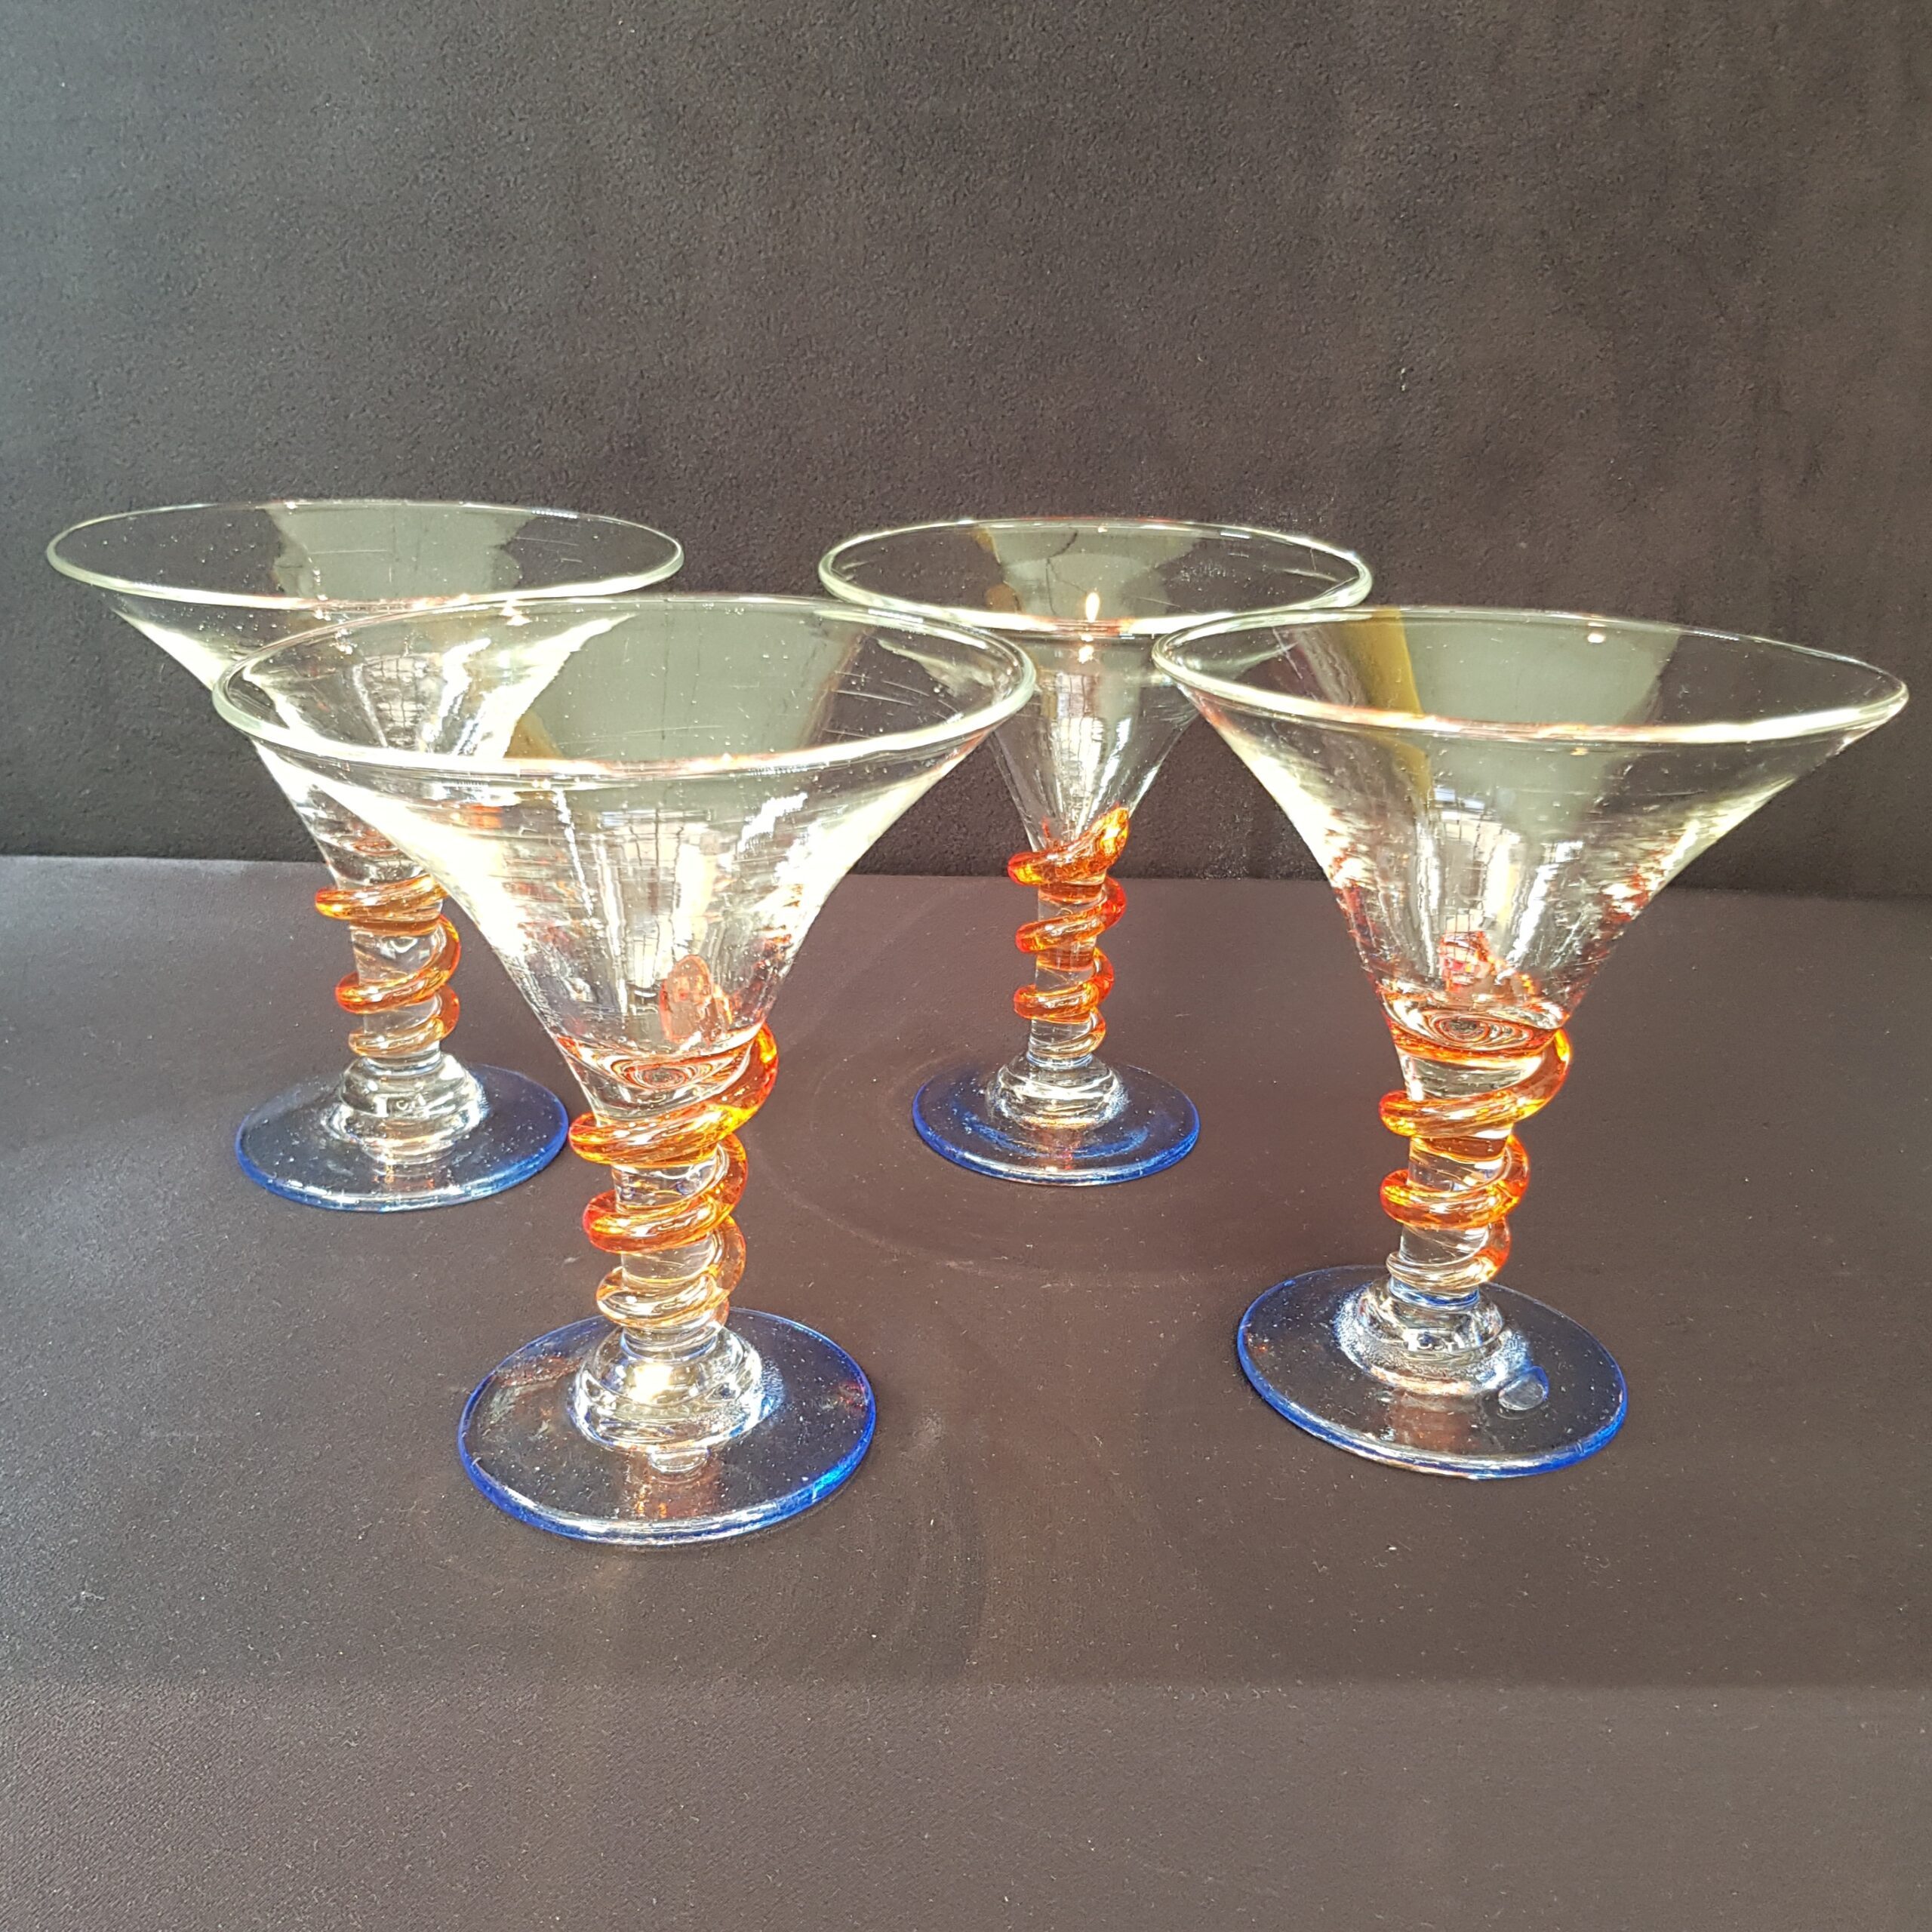 coupe glace sorbet verre souffle brocante seconde main vintage scaled